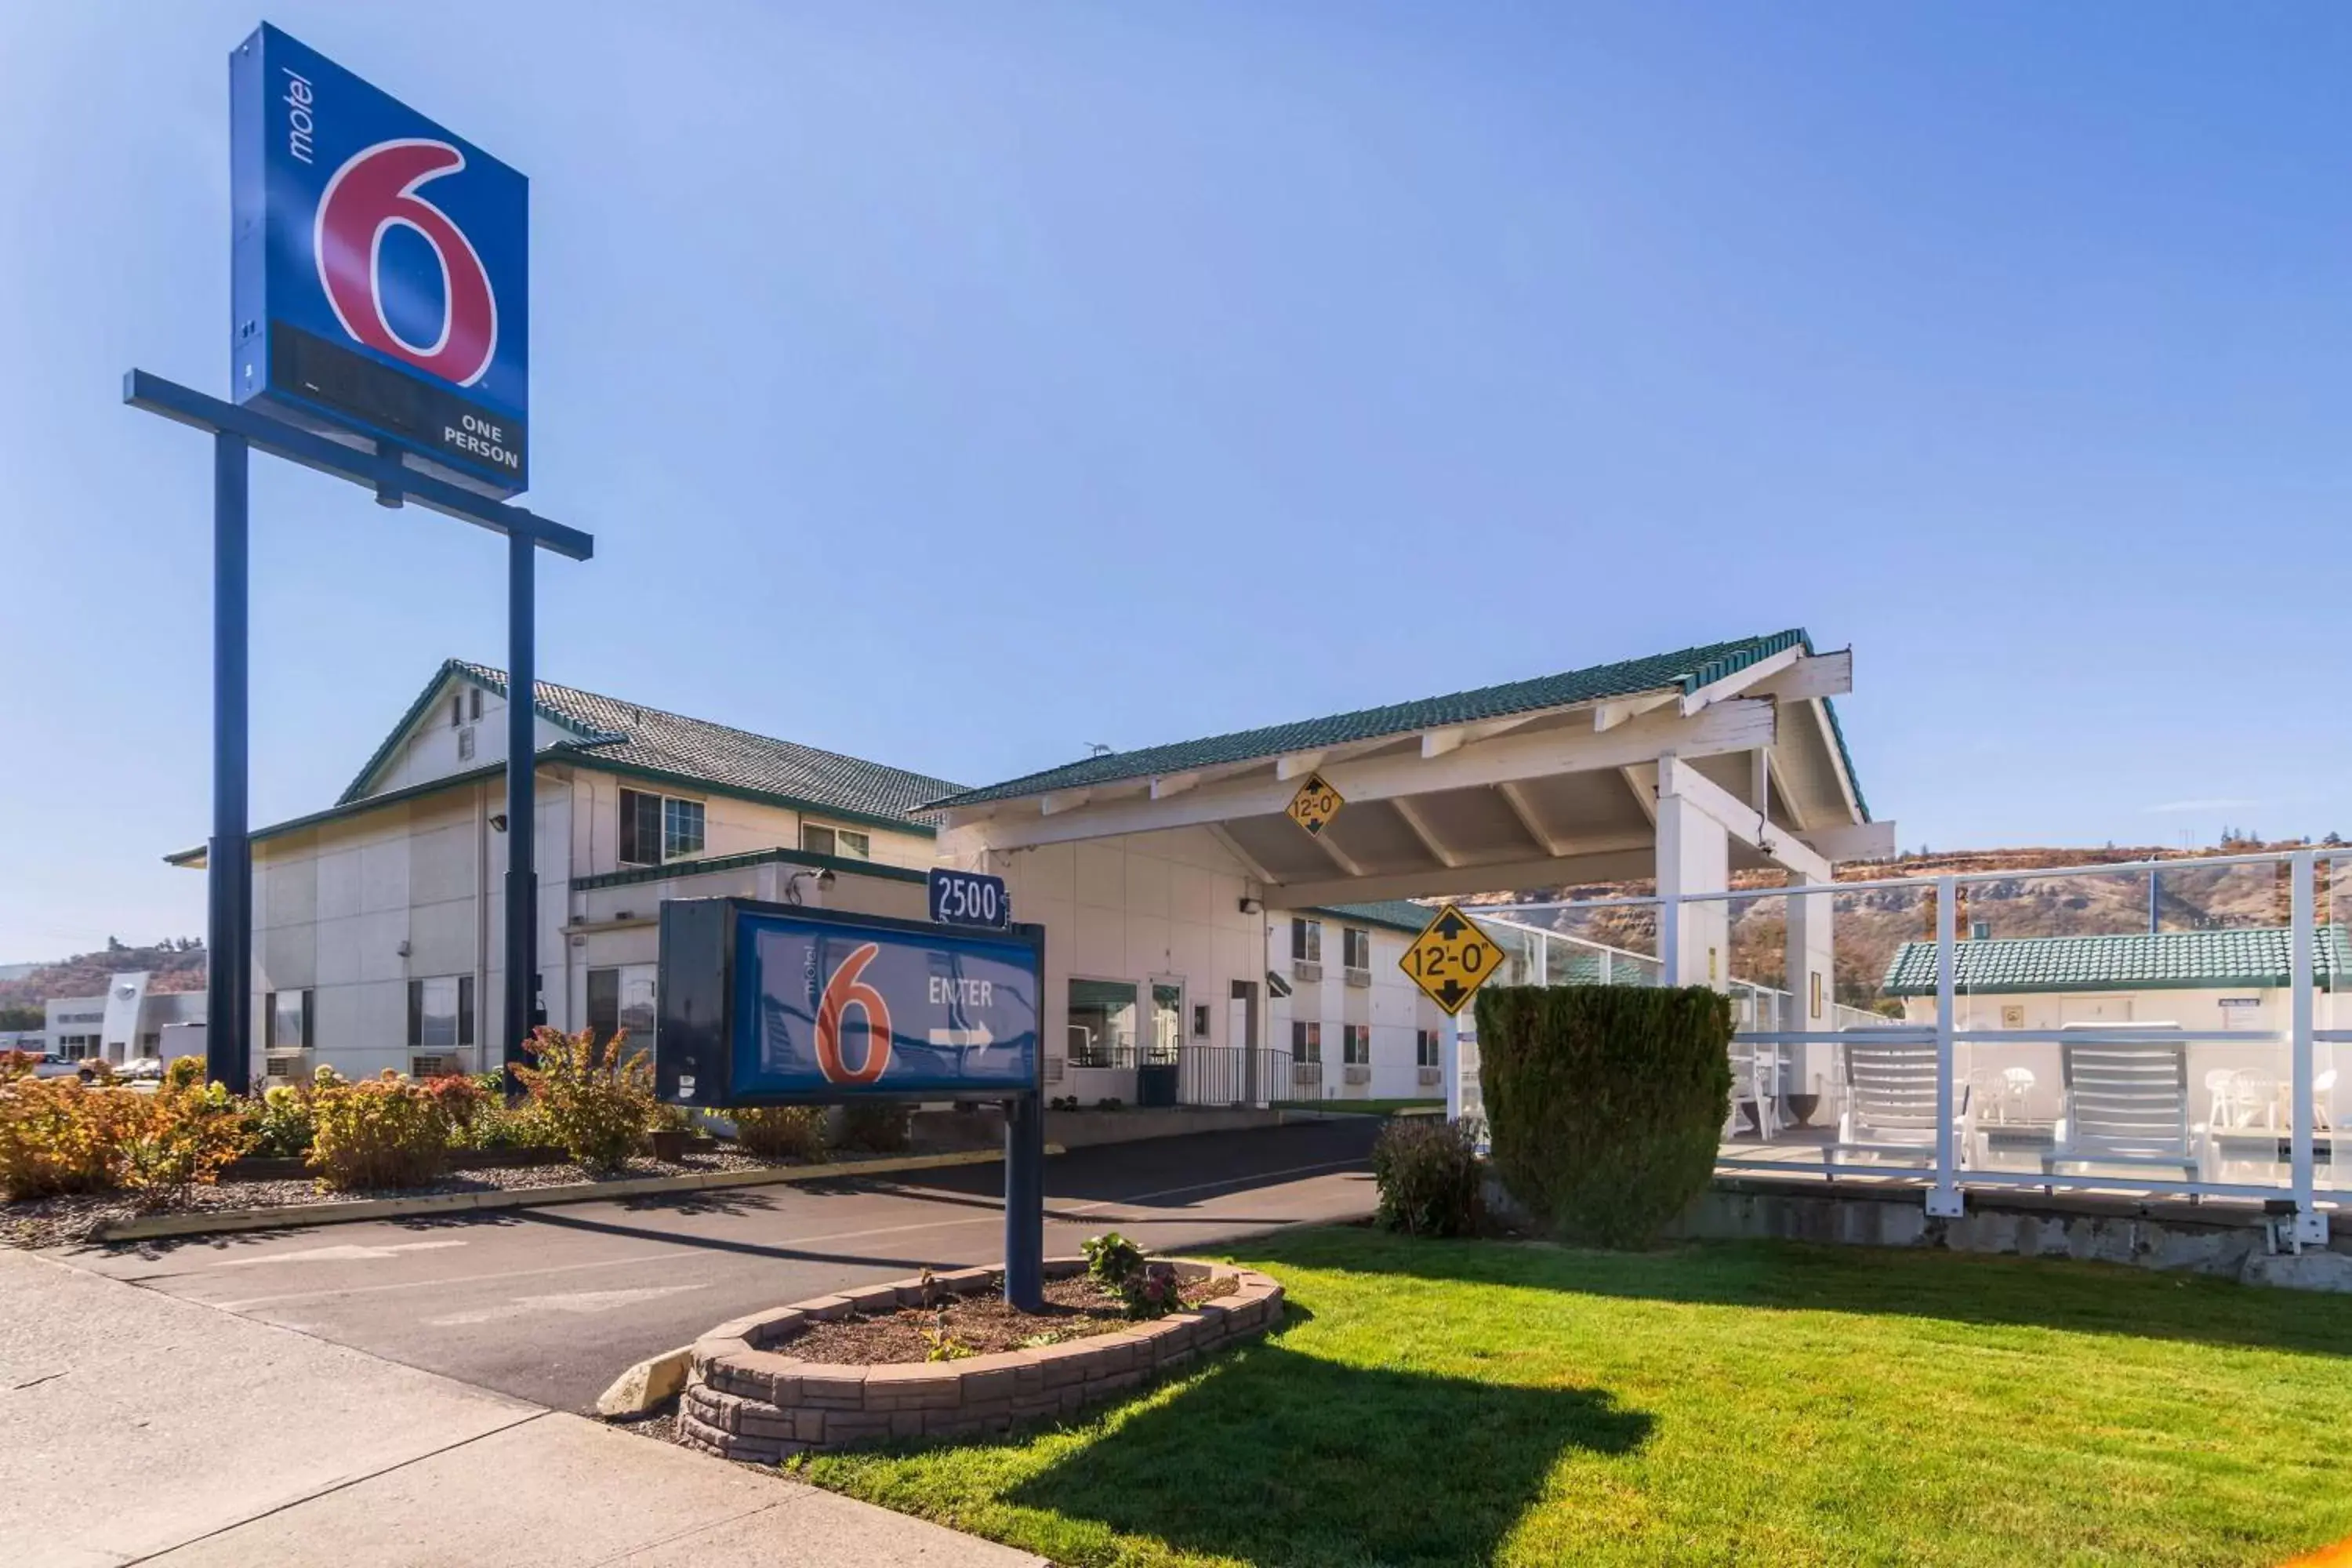 Property Building in Motel 6-The Dalles, OR